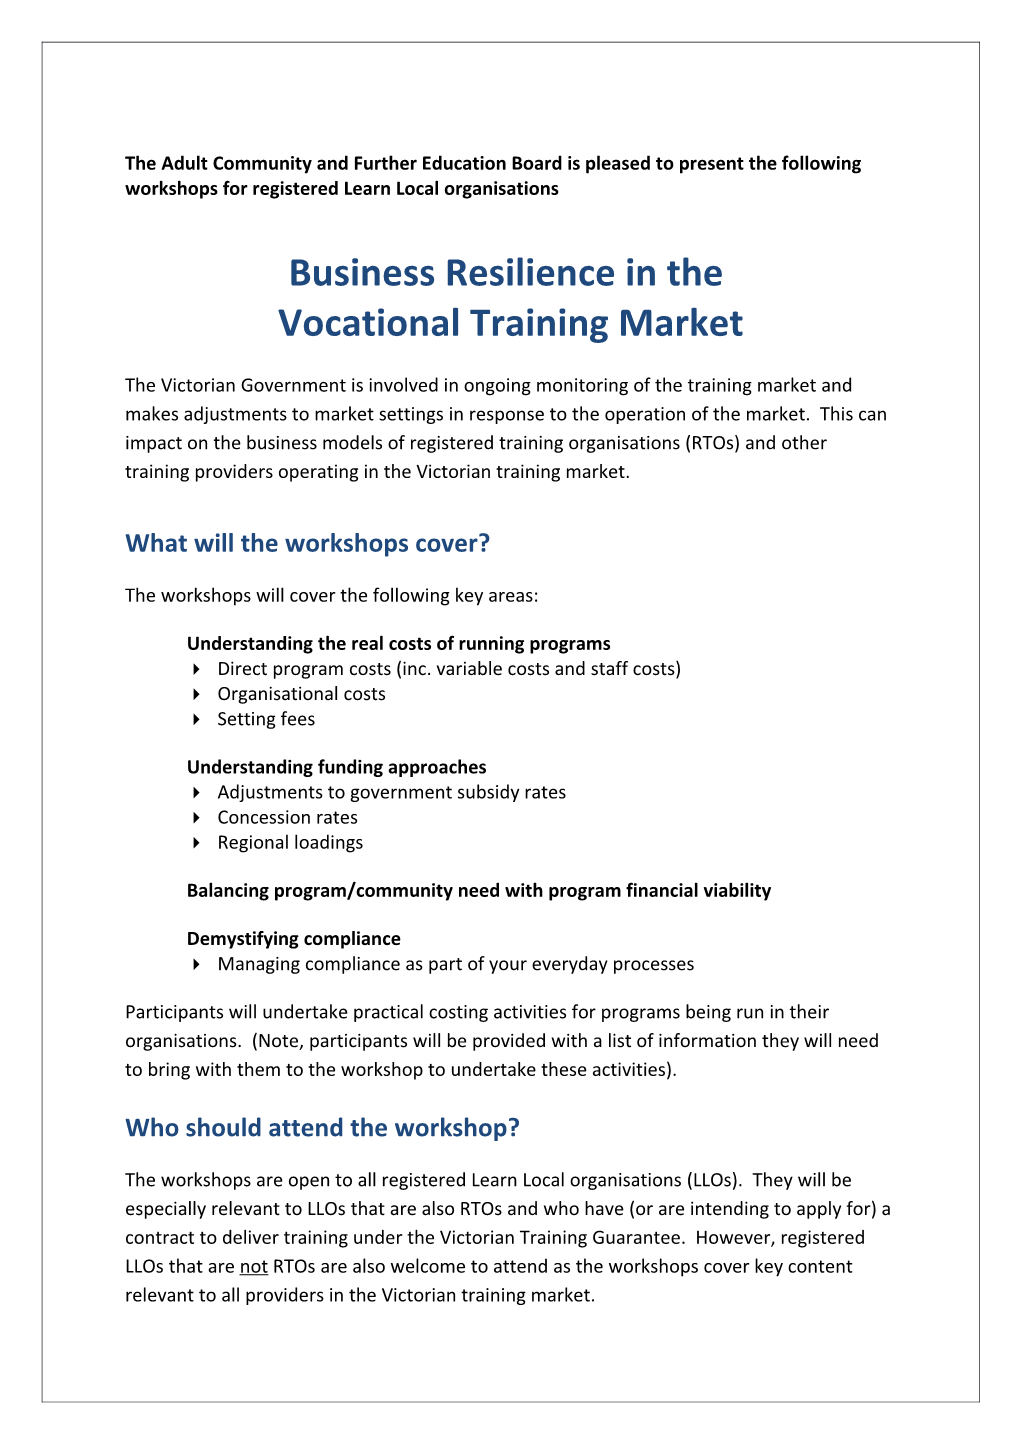 Business Resilience in The